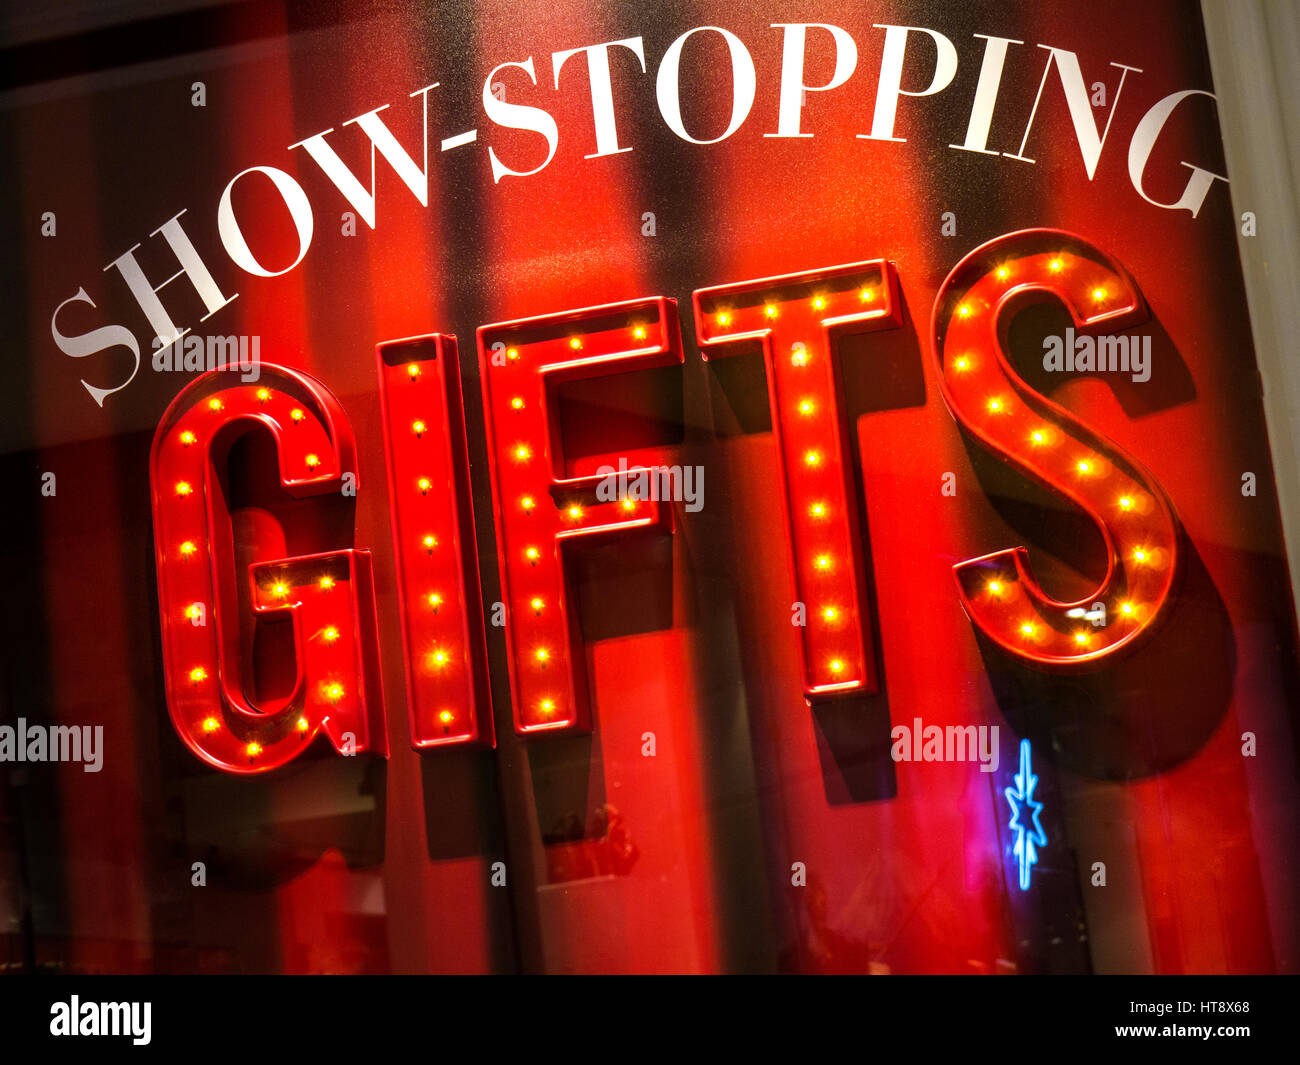 Graphic Christmas.shop window display 'Show-stopping Gifts' Stock Photo